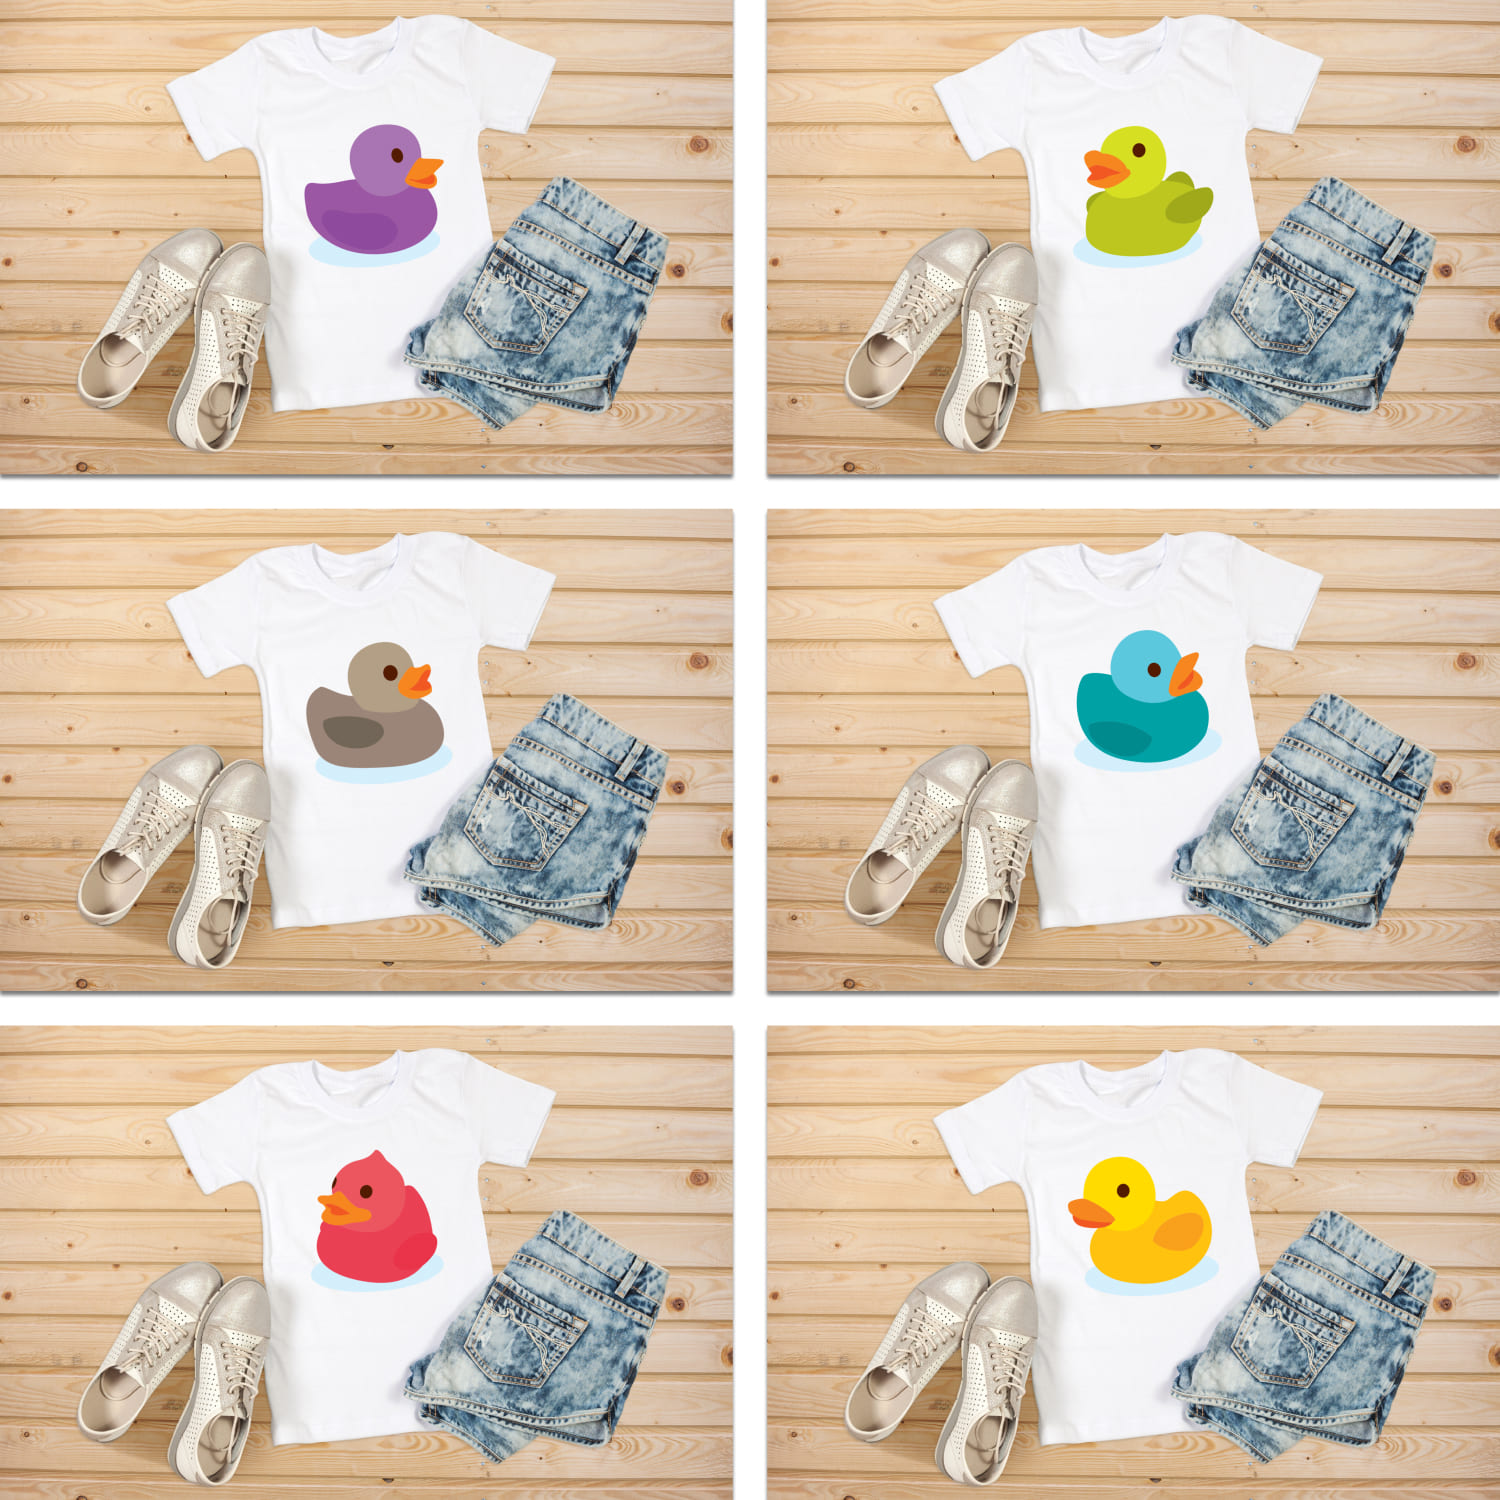 Bundle of t-shirt images with wonderful prints of rubber ducks.